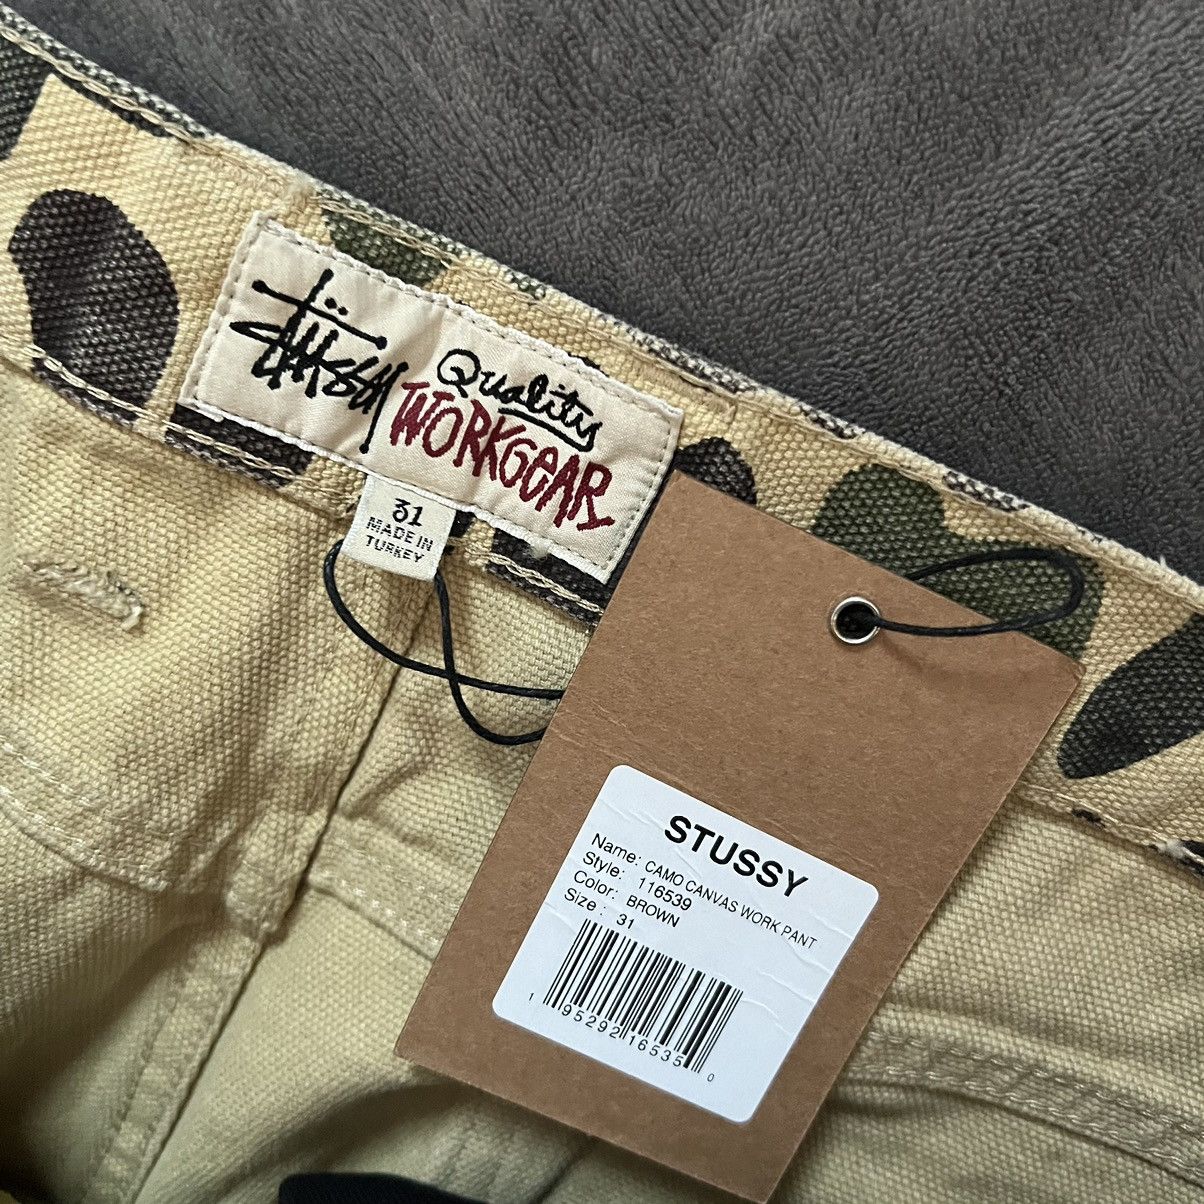 Stussy Stussy Camo Canvas Double Knee Work Pants - Brown | Grailed